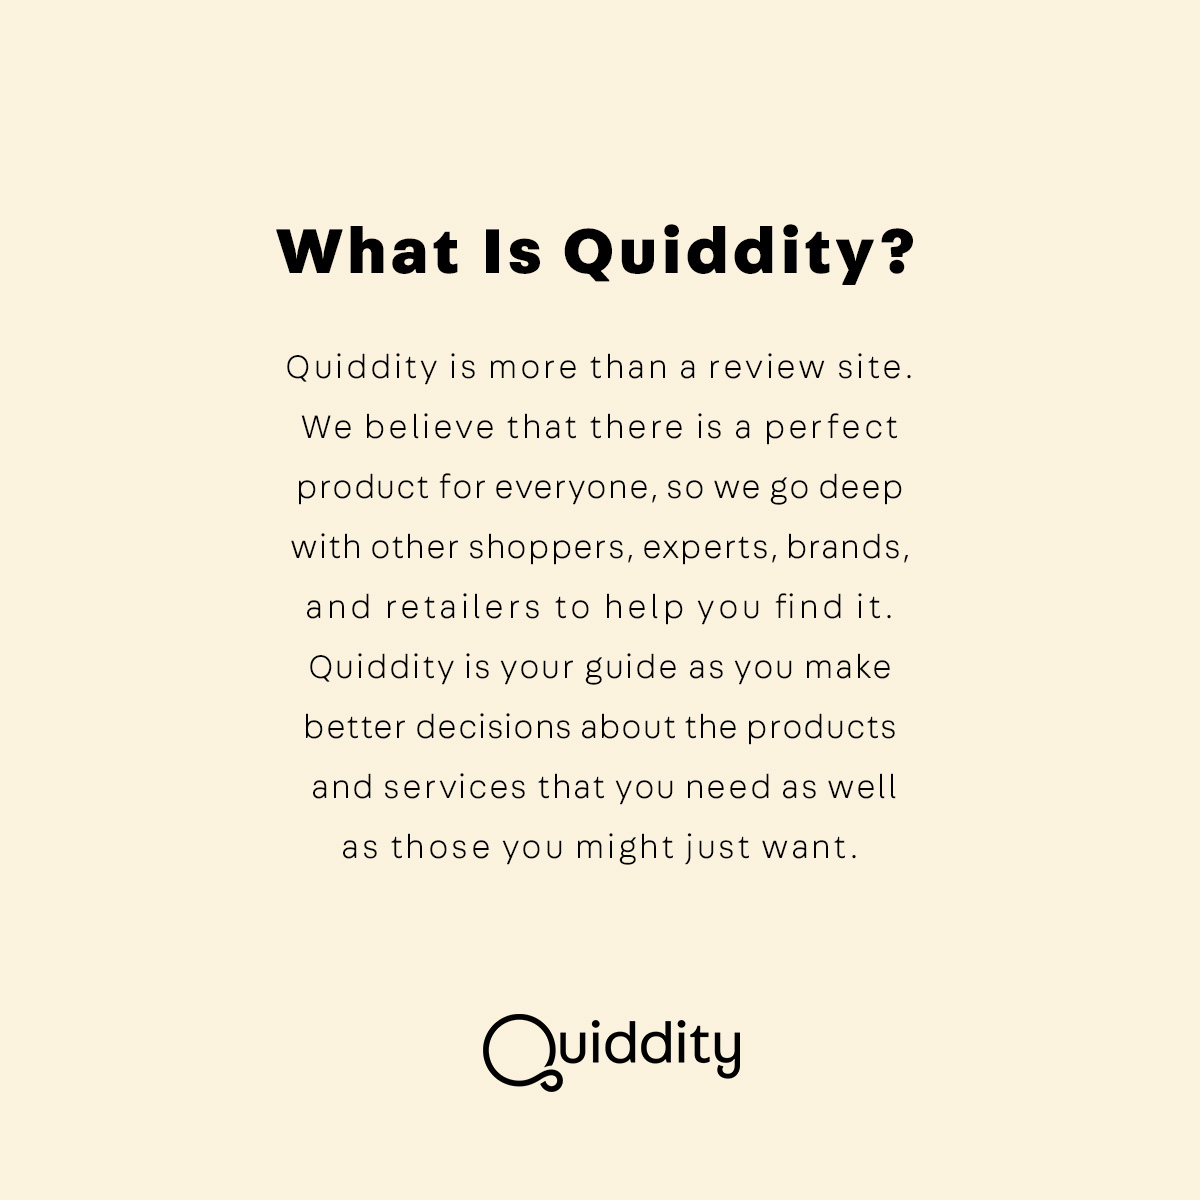 Quiddity_Social_0000_What Is Quiddity.jpg